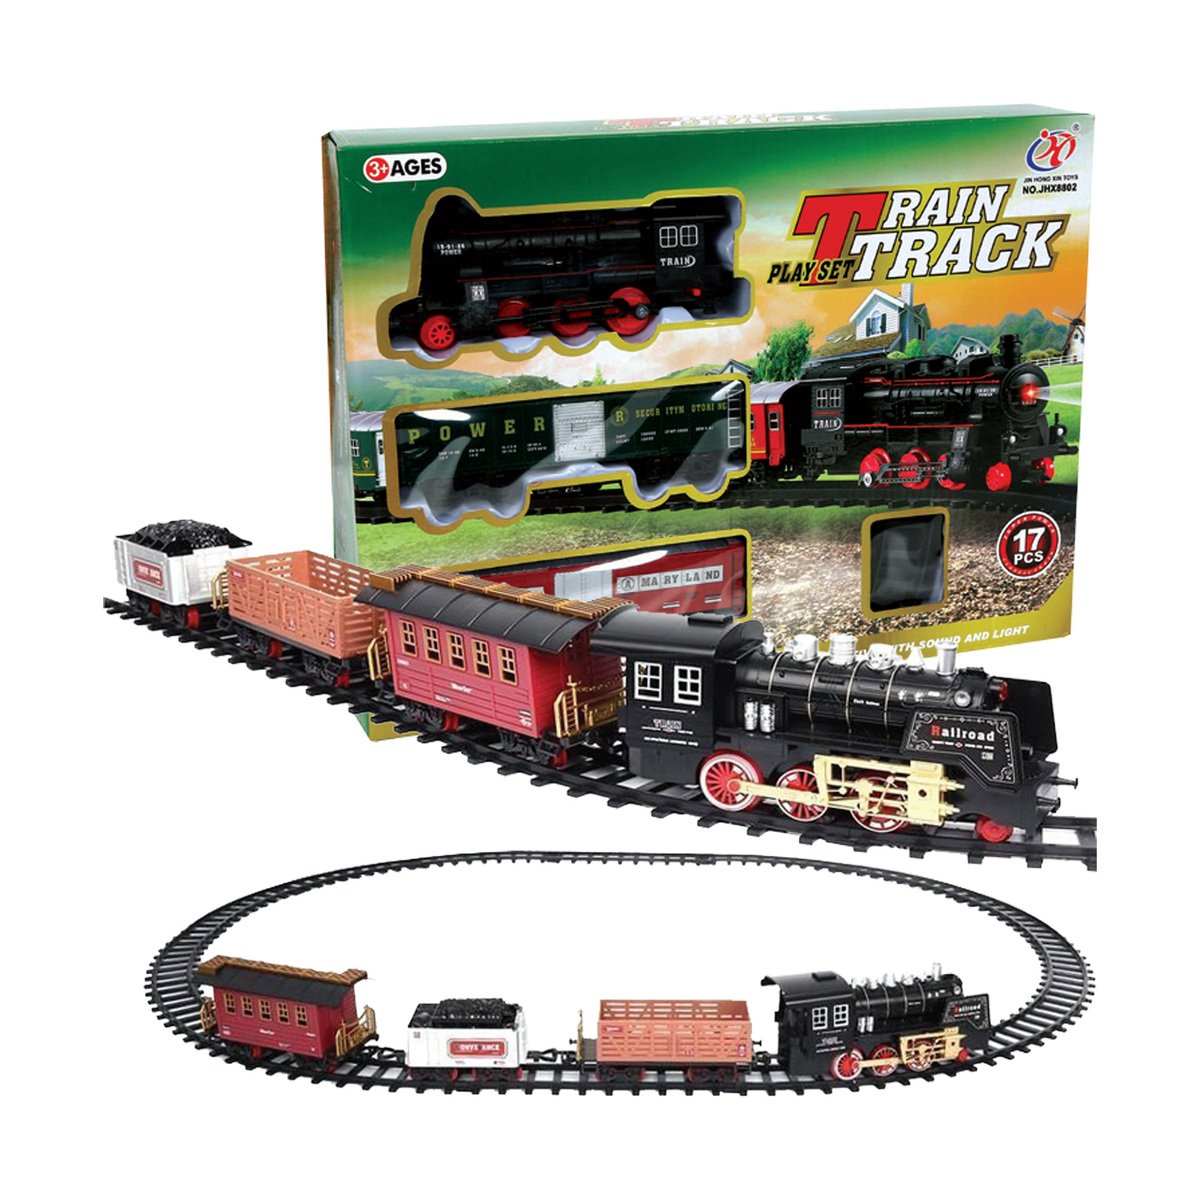 Skid Fusion Battery Operated TrainTrack Play Set 8801